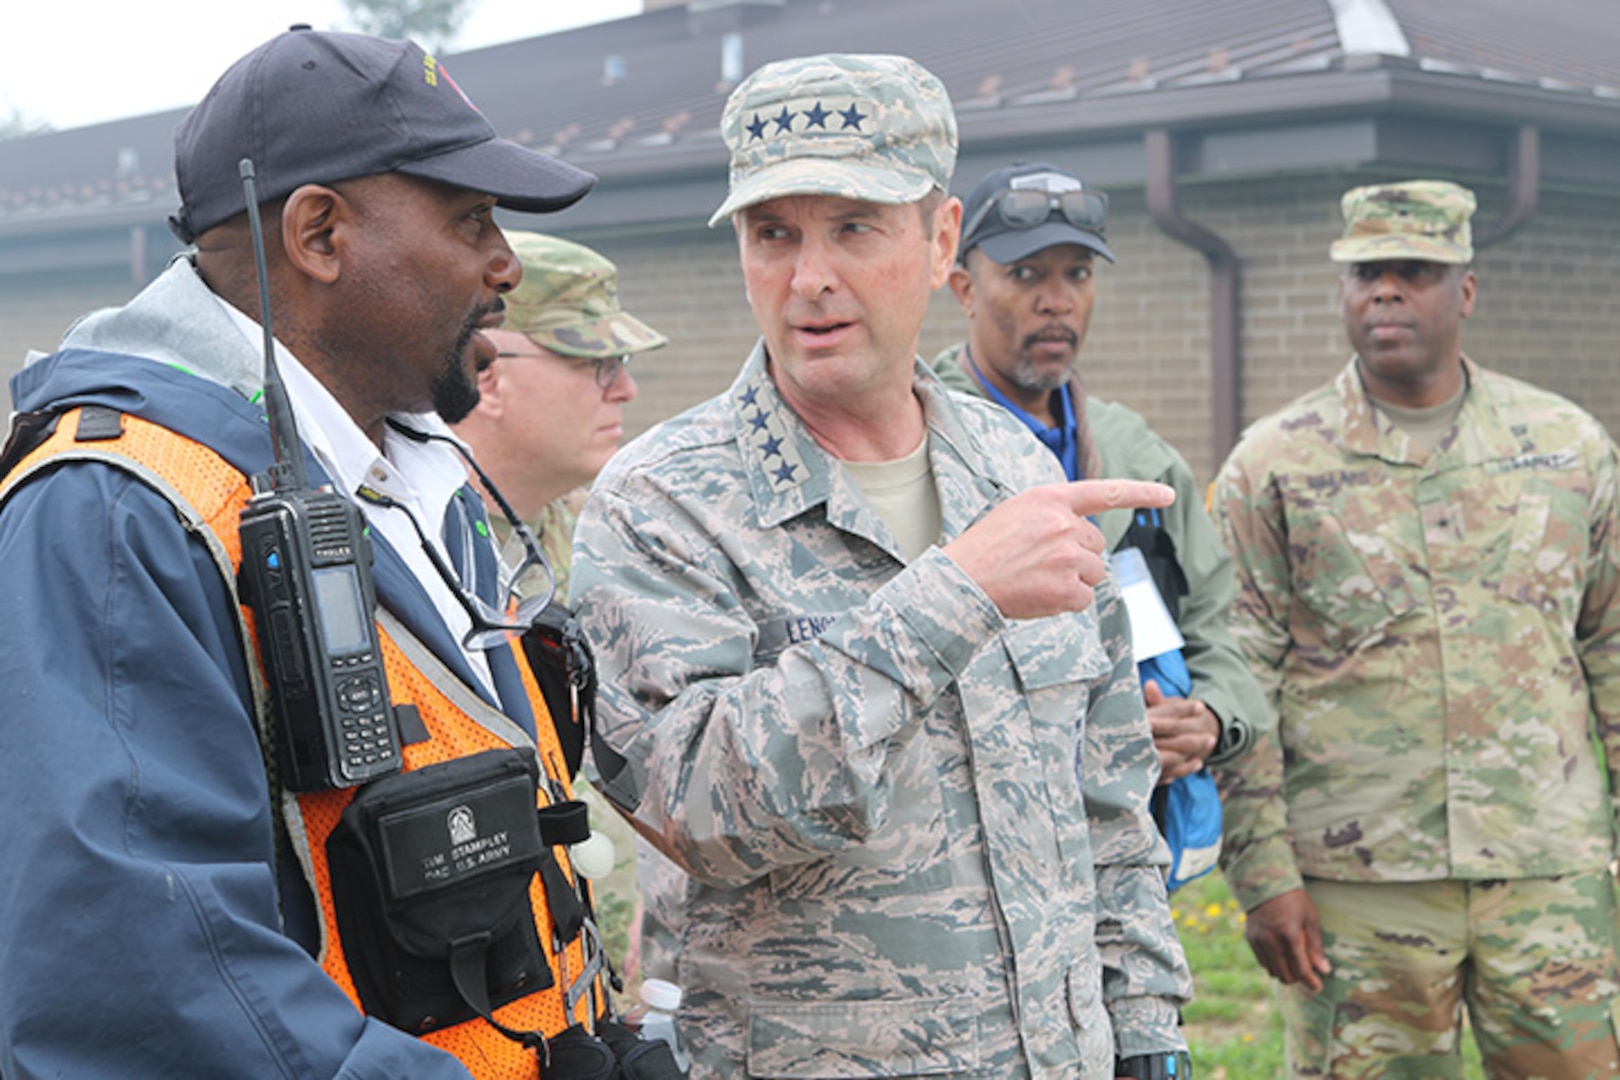 Tim Stampley, a Department of the Army Civilian observer controller trainer, and his crew, speaks to Gen. Joseph L. Lengyel, Chief of the National Guard Bureau, and gives him a tour of the training during Guardian Response 18 at Muscatatuck Urban Training Center, Ind., April 14, 2018.